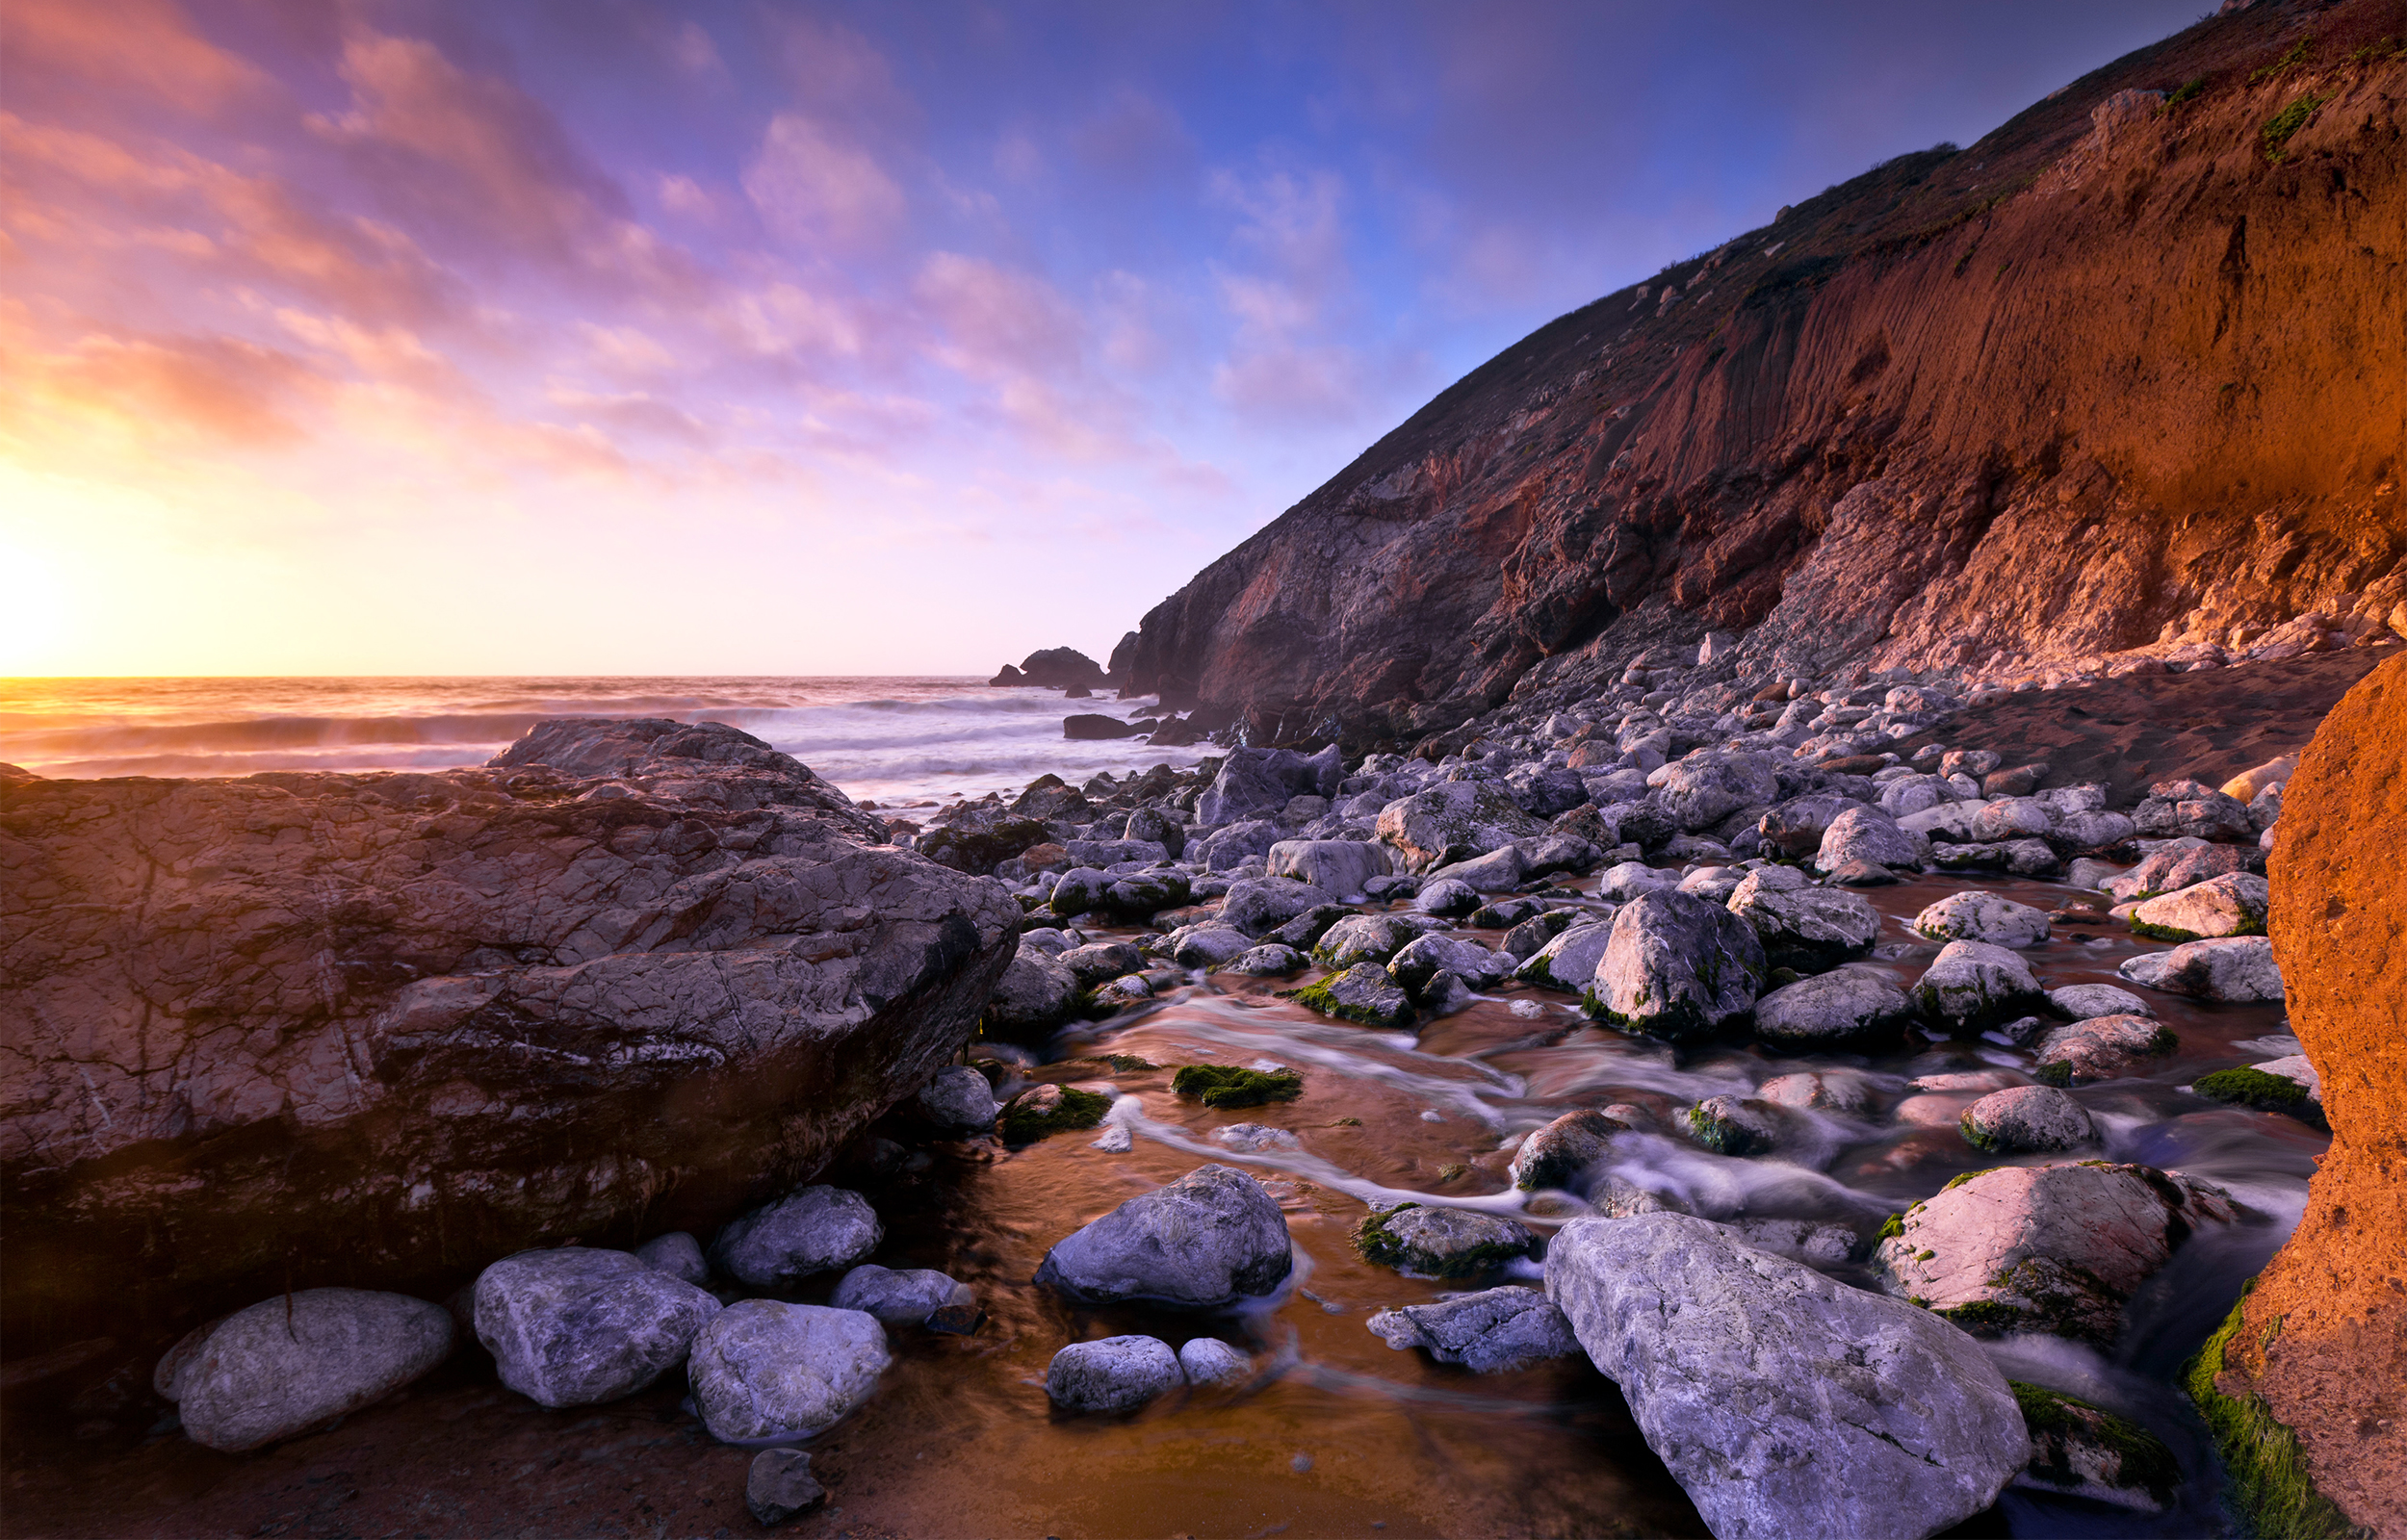 Daily Wallpaper: Rocky Beach Sunset | I Like To Waste My Time